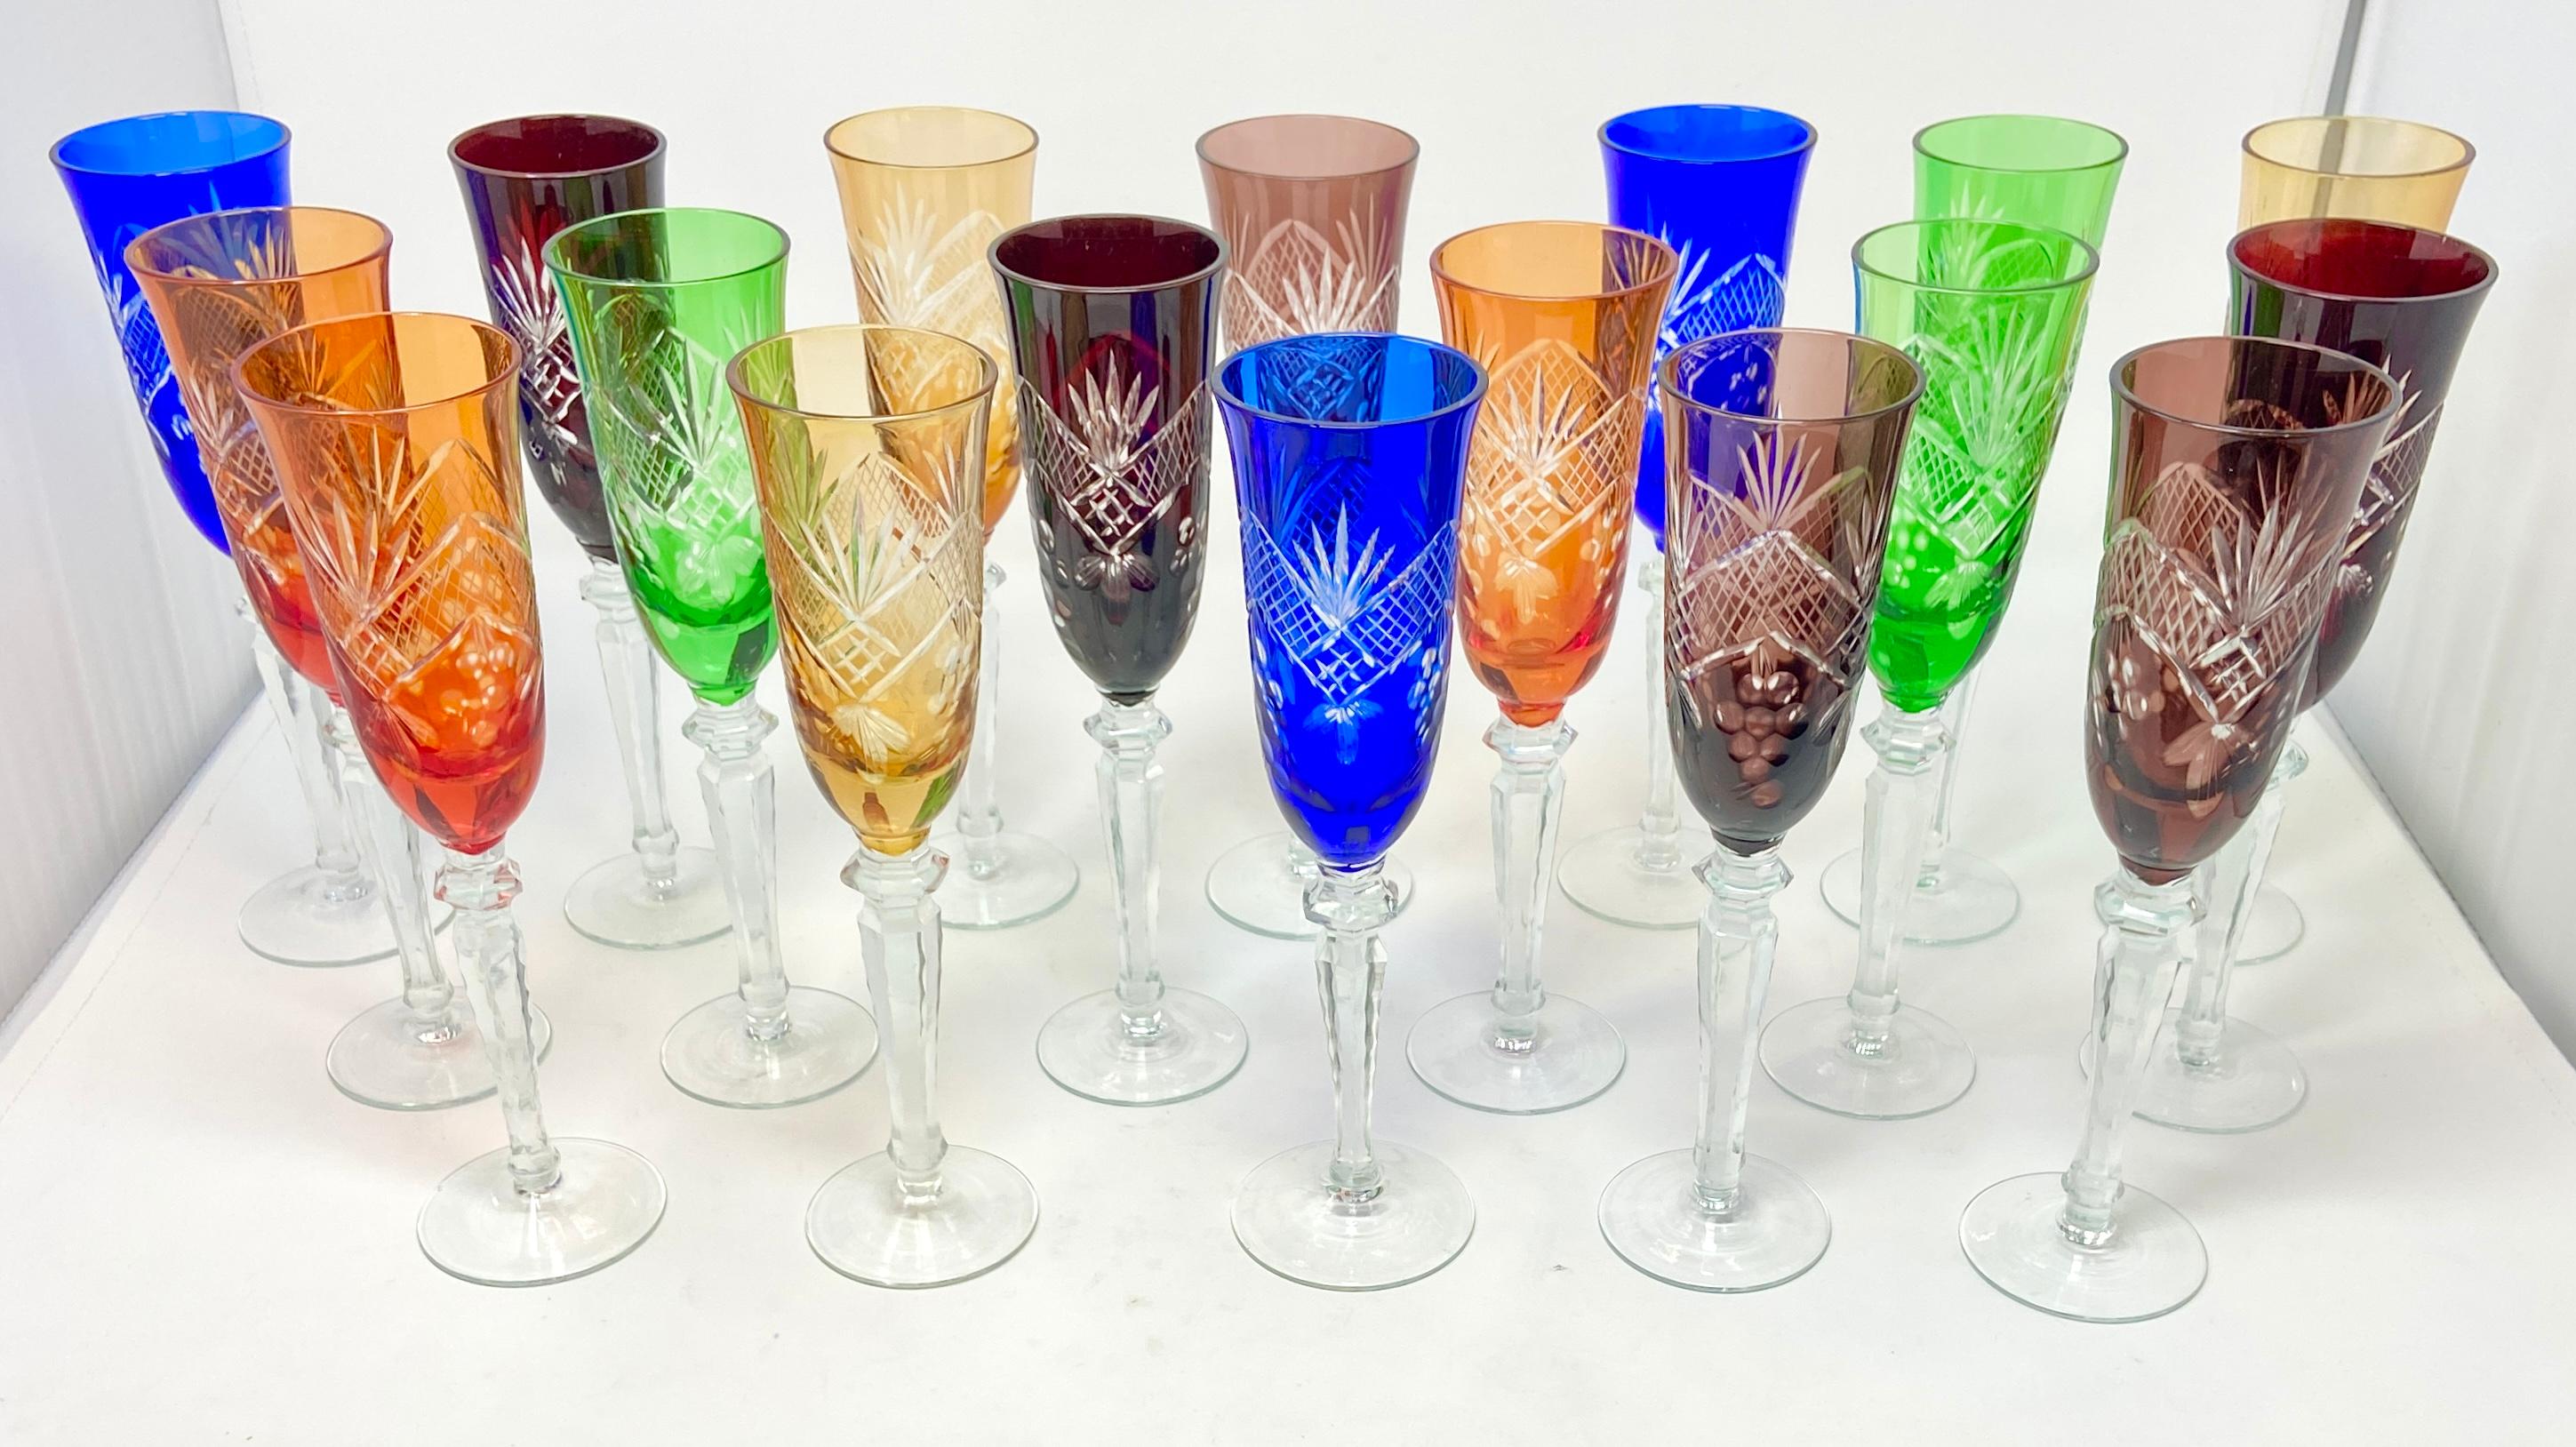 Set of 16 Bohemian multi-colored cut to clear glass champagne goblets.
These beautiful champagne glasses come in 6 bright colors: cobalt blue, ruby red, kelly green, golden yellow, persimmon orange and soft violet.